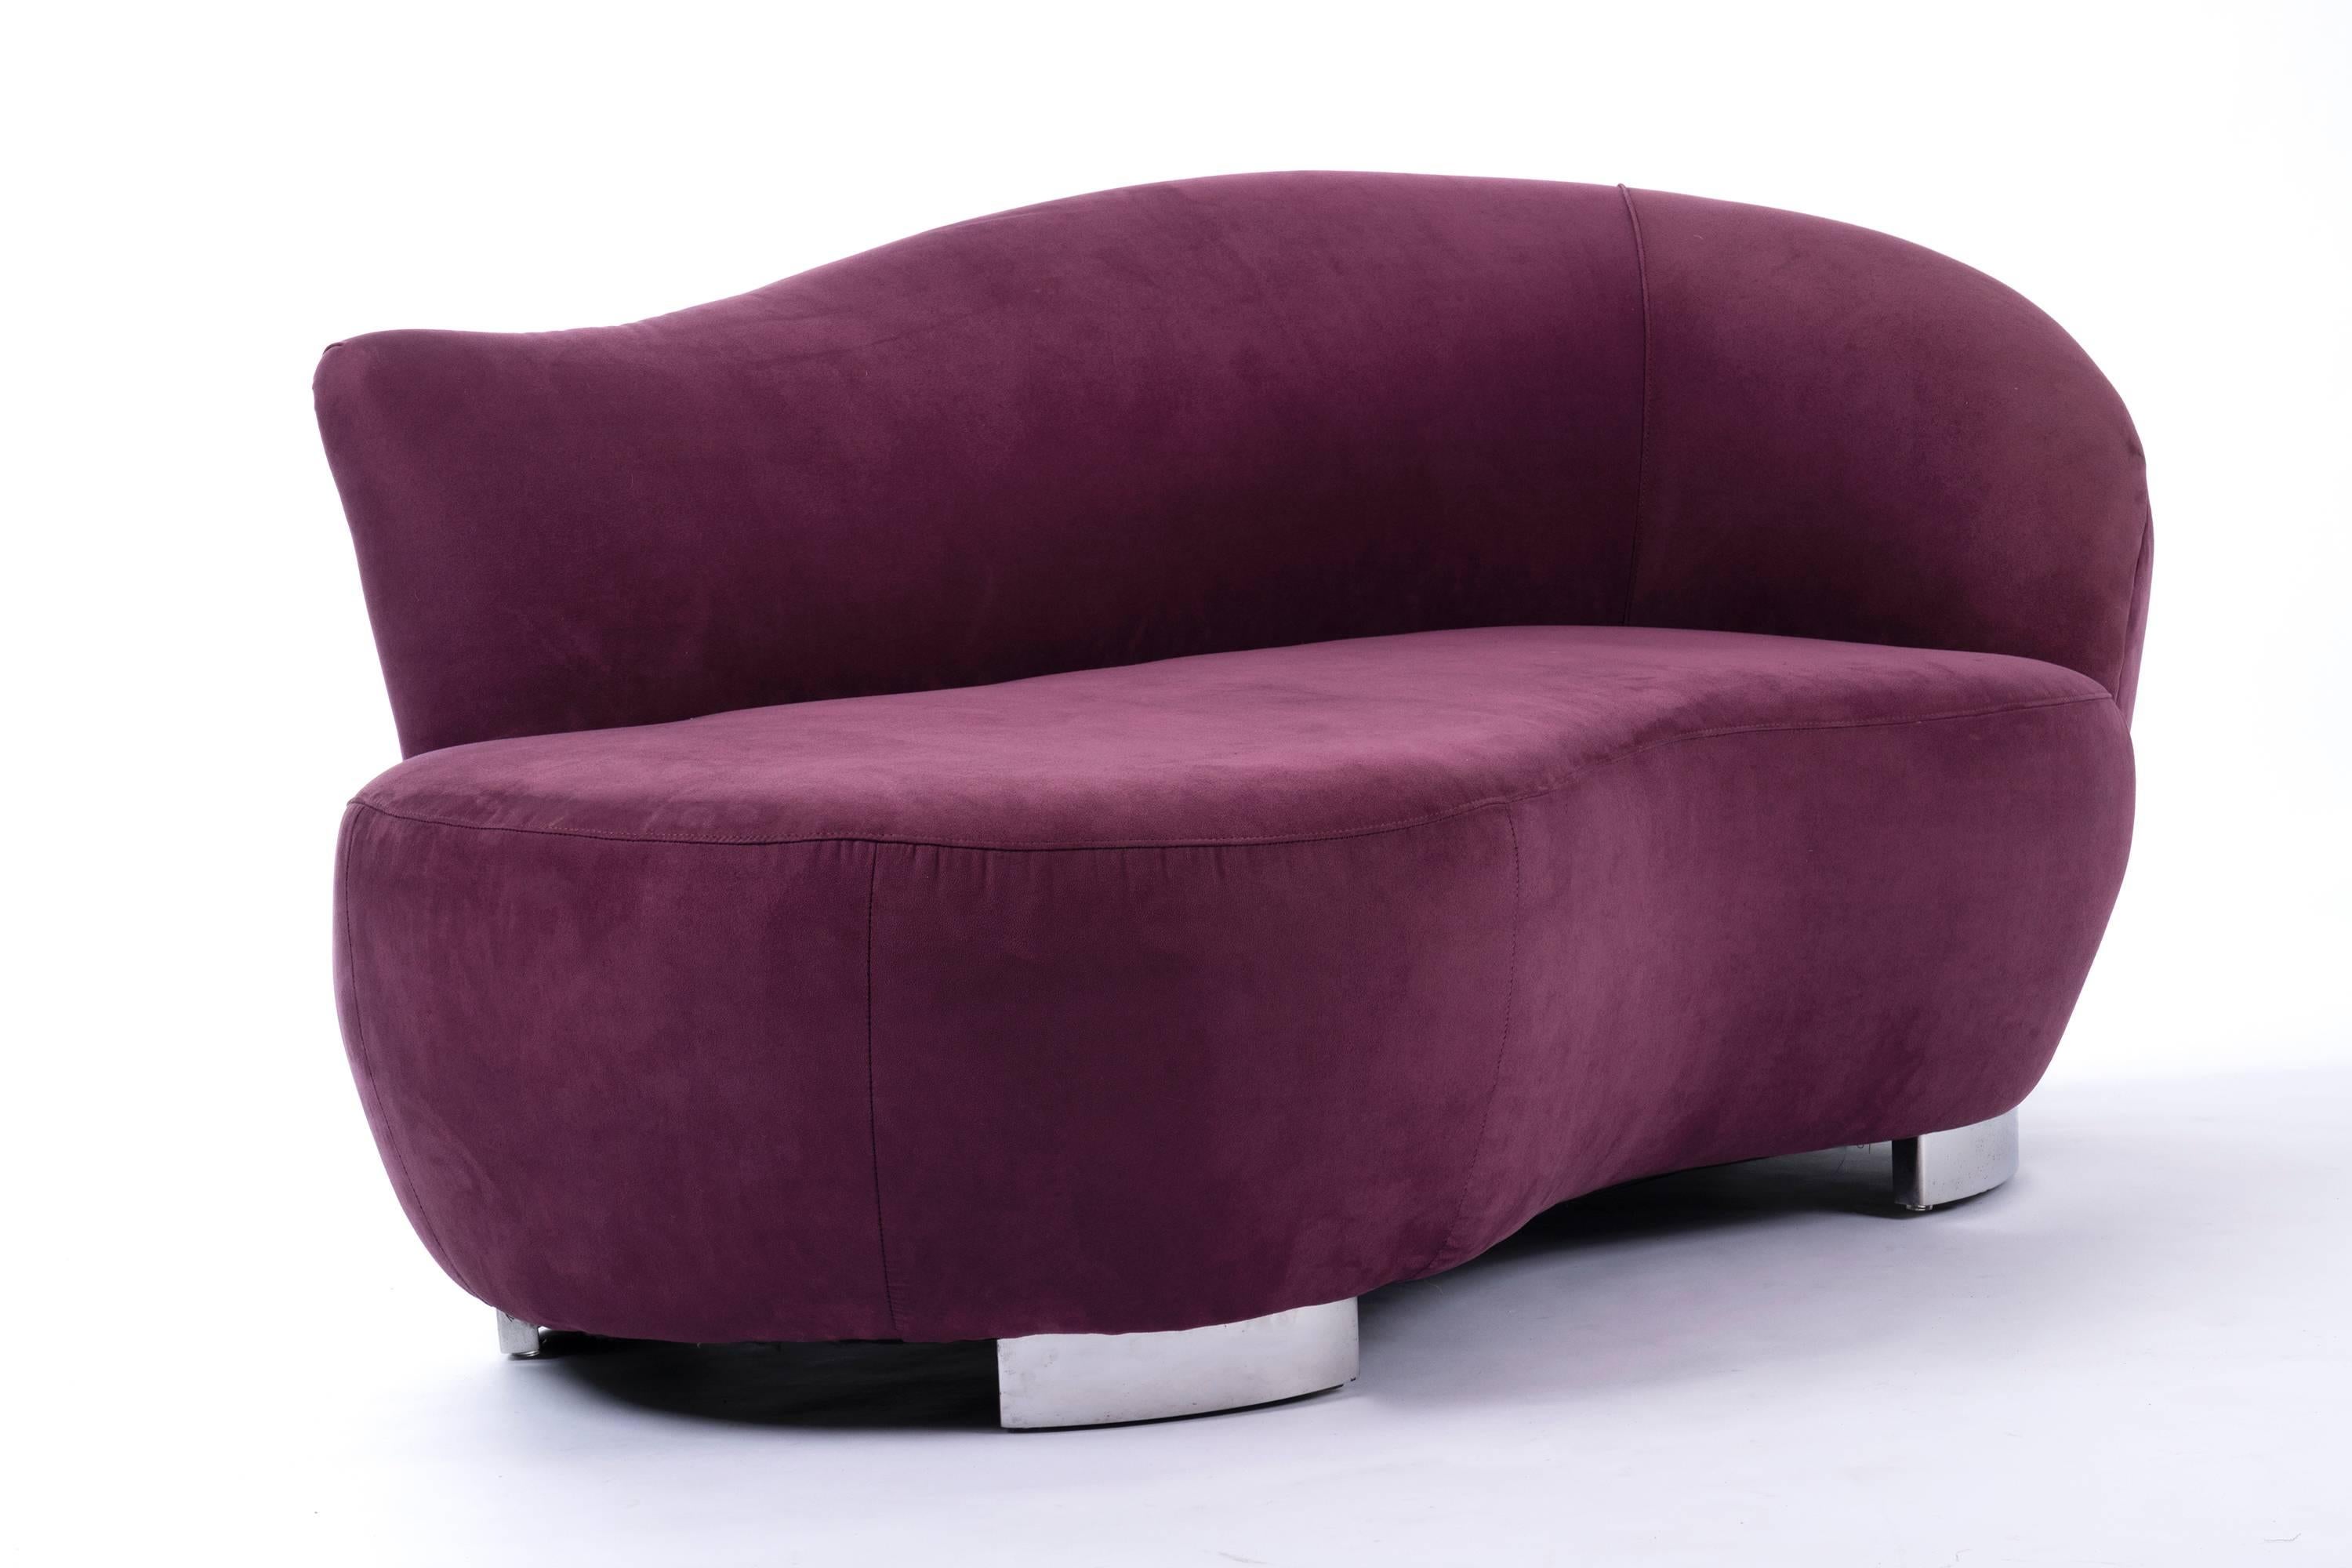 Asymmetric chaise longue or settee. Purple ultrasuede upholstery with four chrome-plated legs.